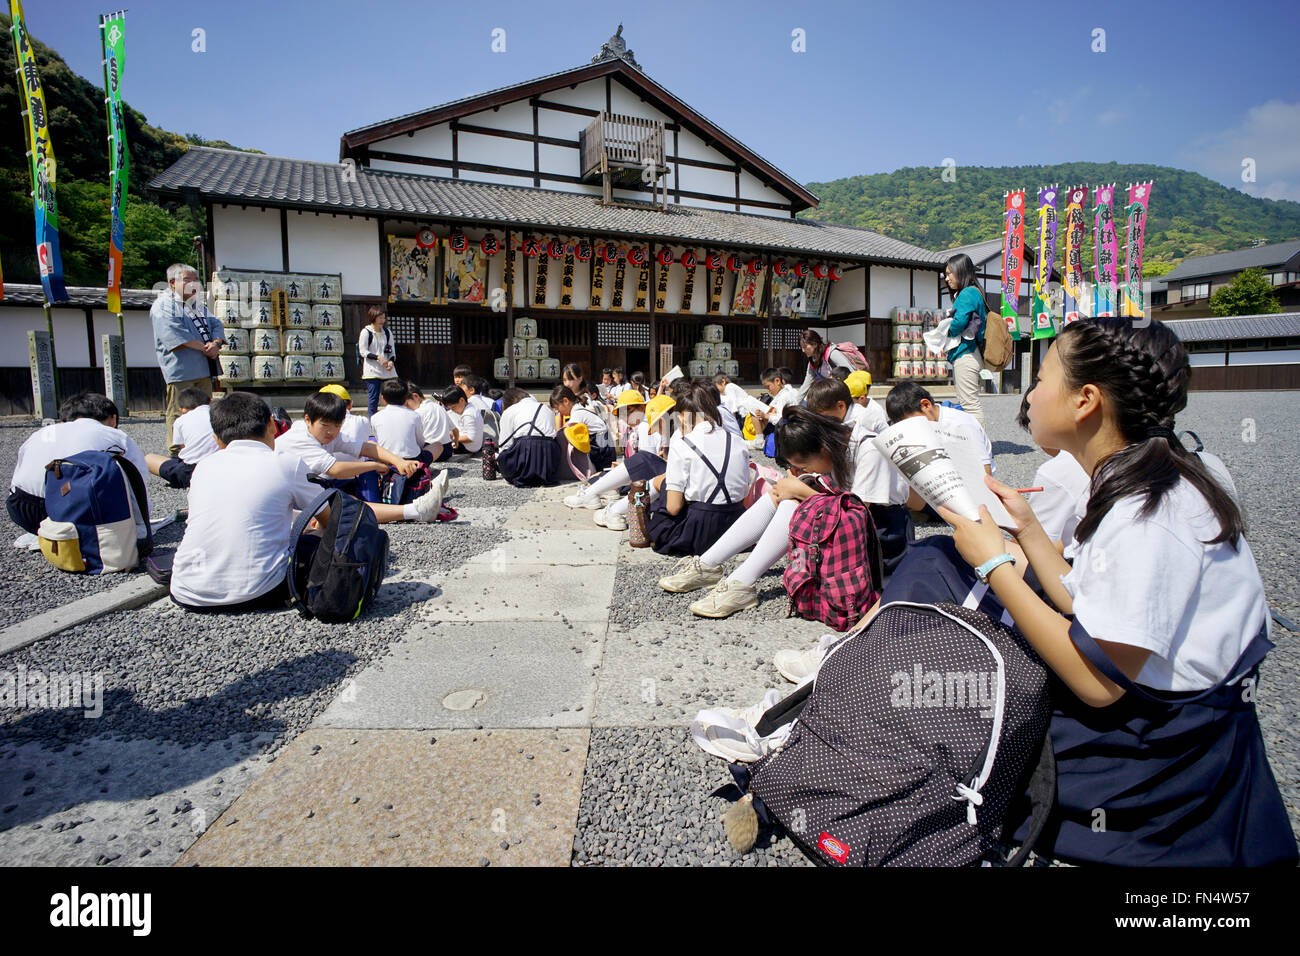 Excursion of an Japanese elementary school Stock Photo